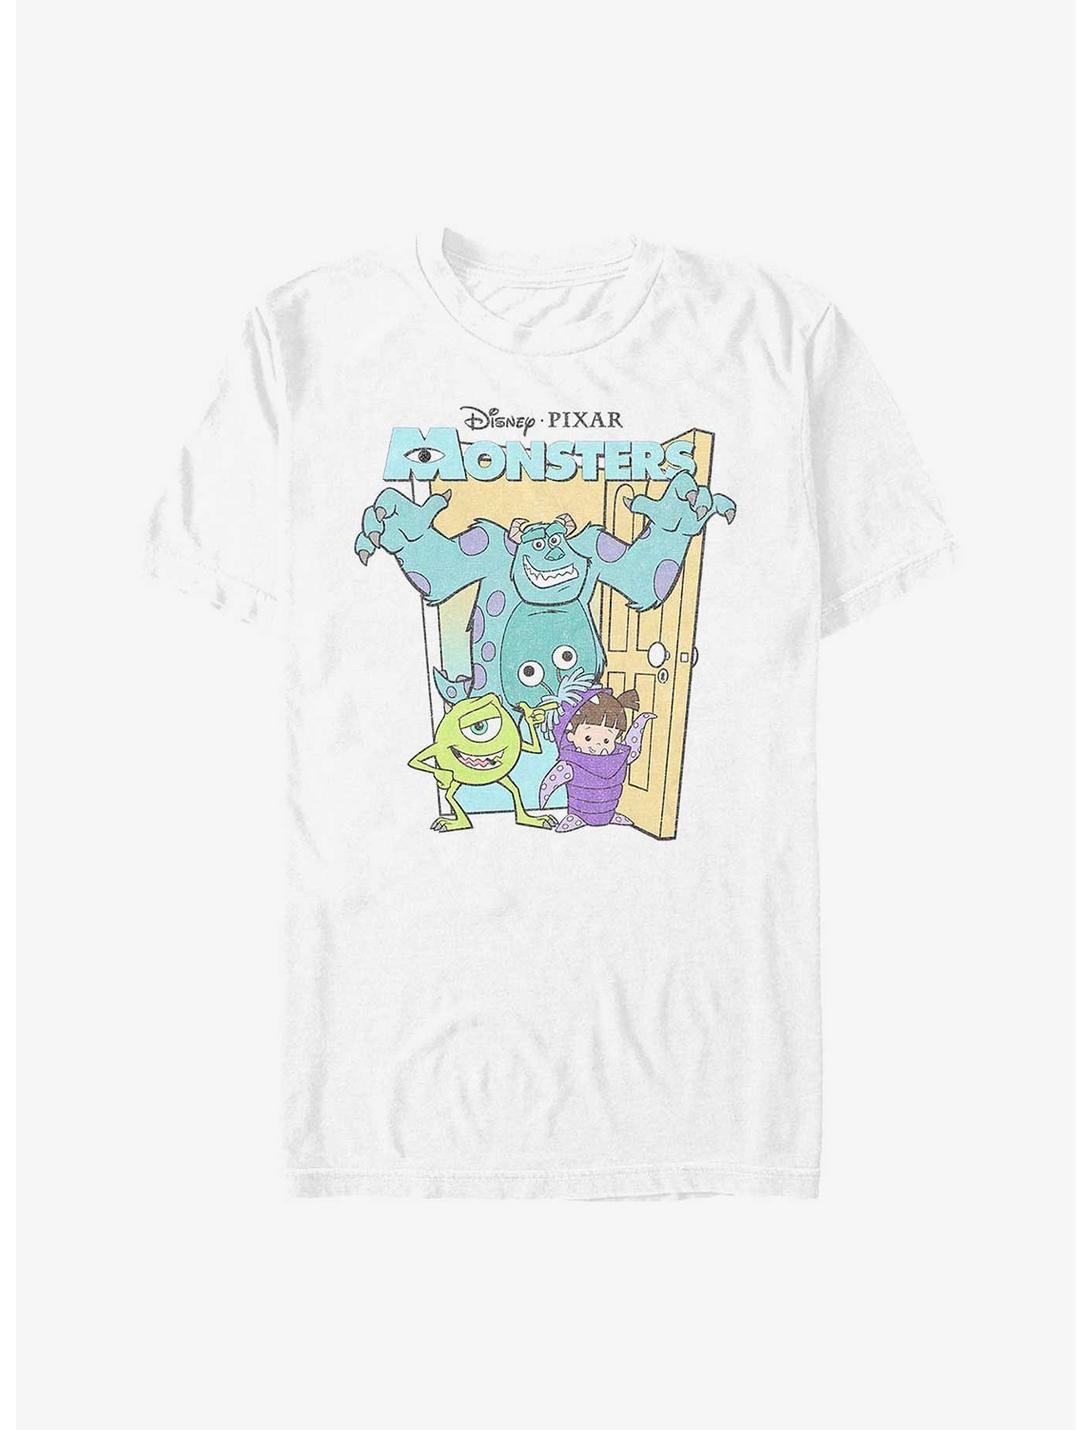 Disney Pixar Monsters Inc. Mike, Sulley, and Boo Poster T-Shirt, WHITE, hi-res